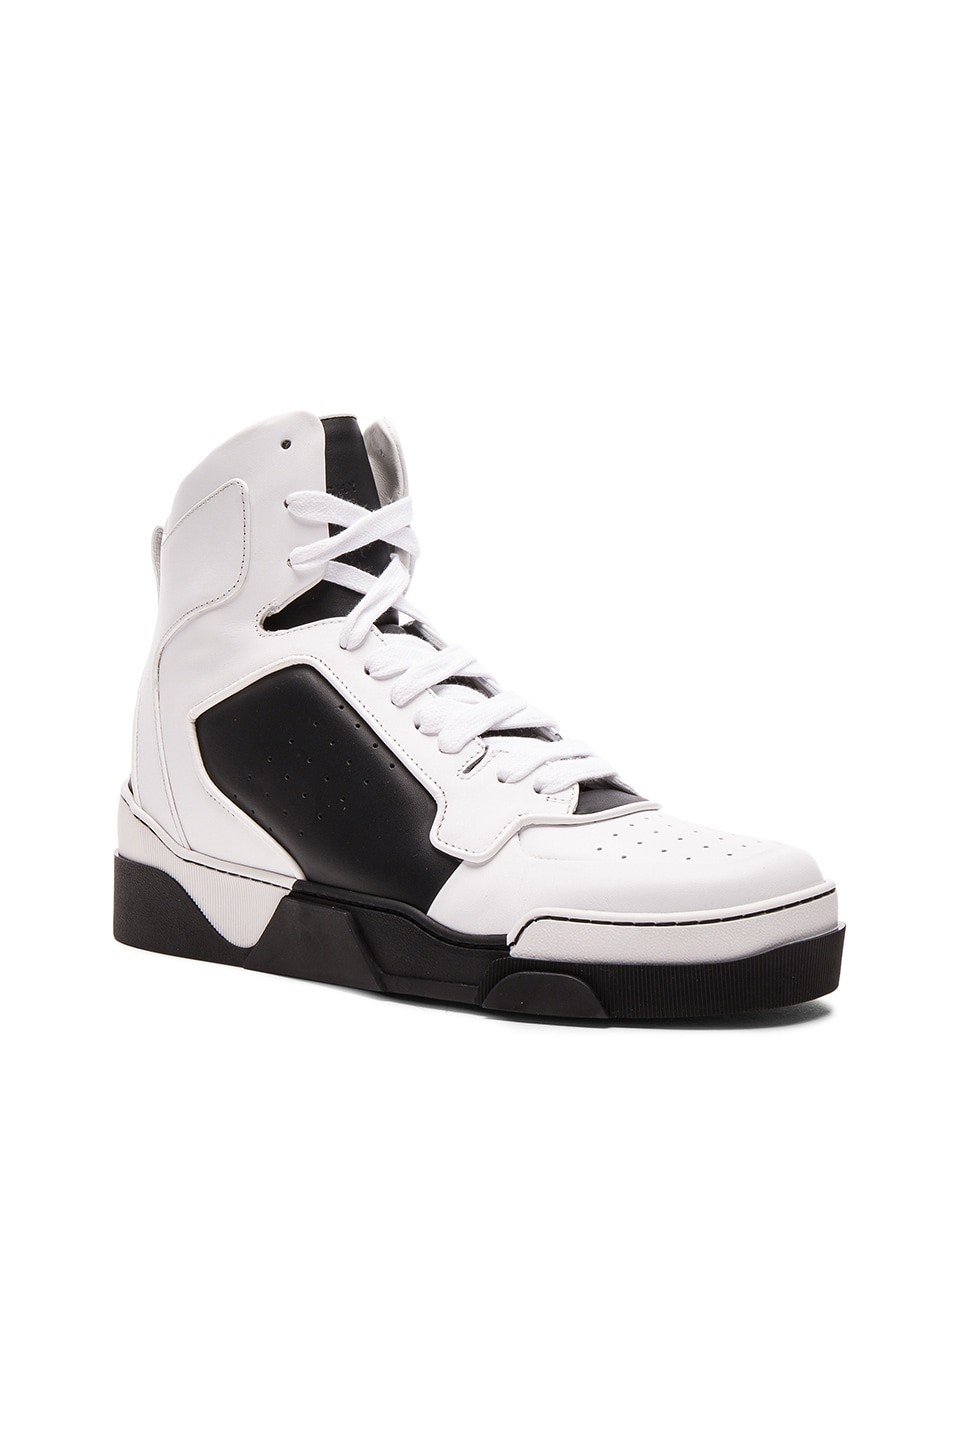 Image 1 of Givenchy Leather High Top Tyson Sneakers in Black & White